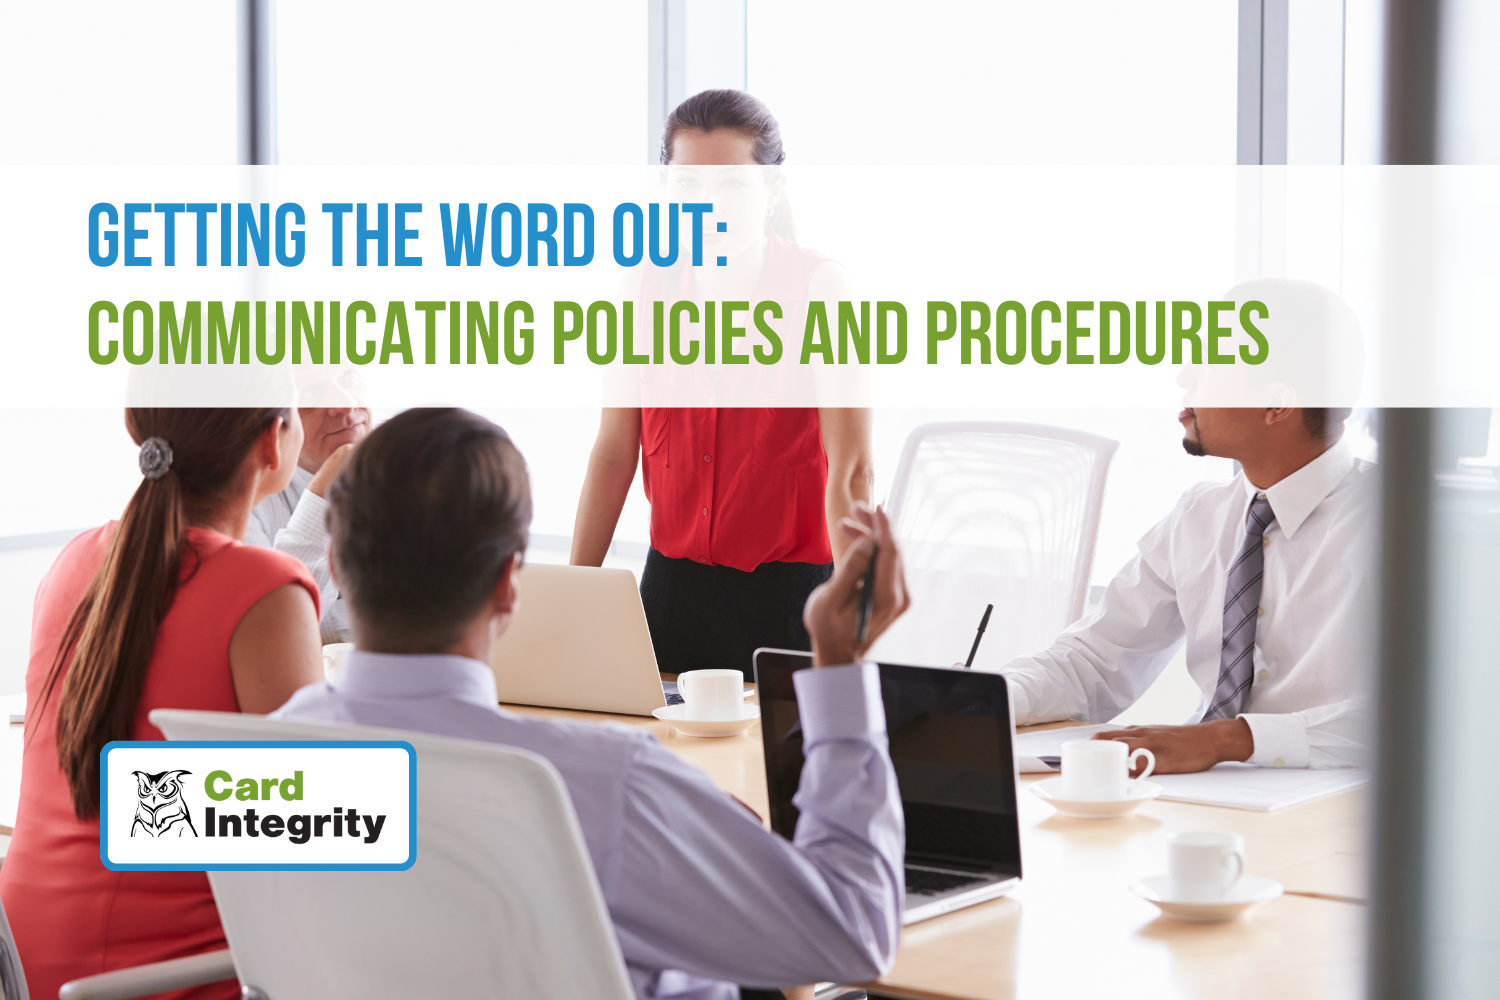 Getting the Word Out: Communicating Policies and Procedures